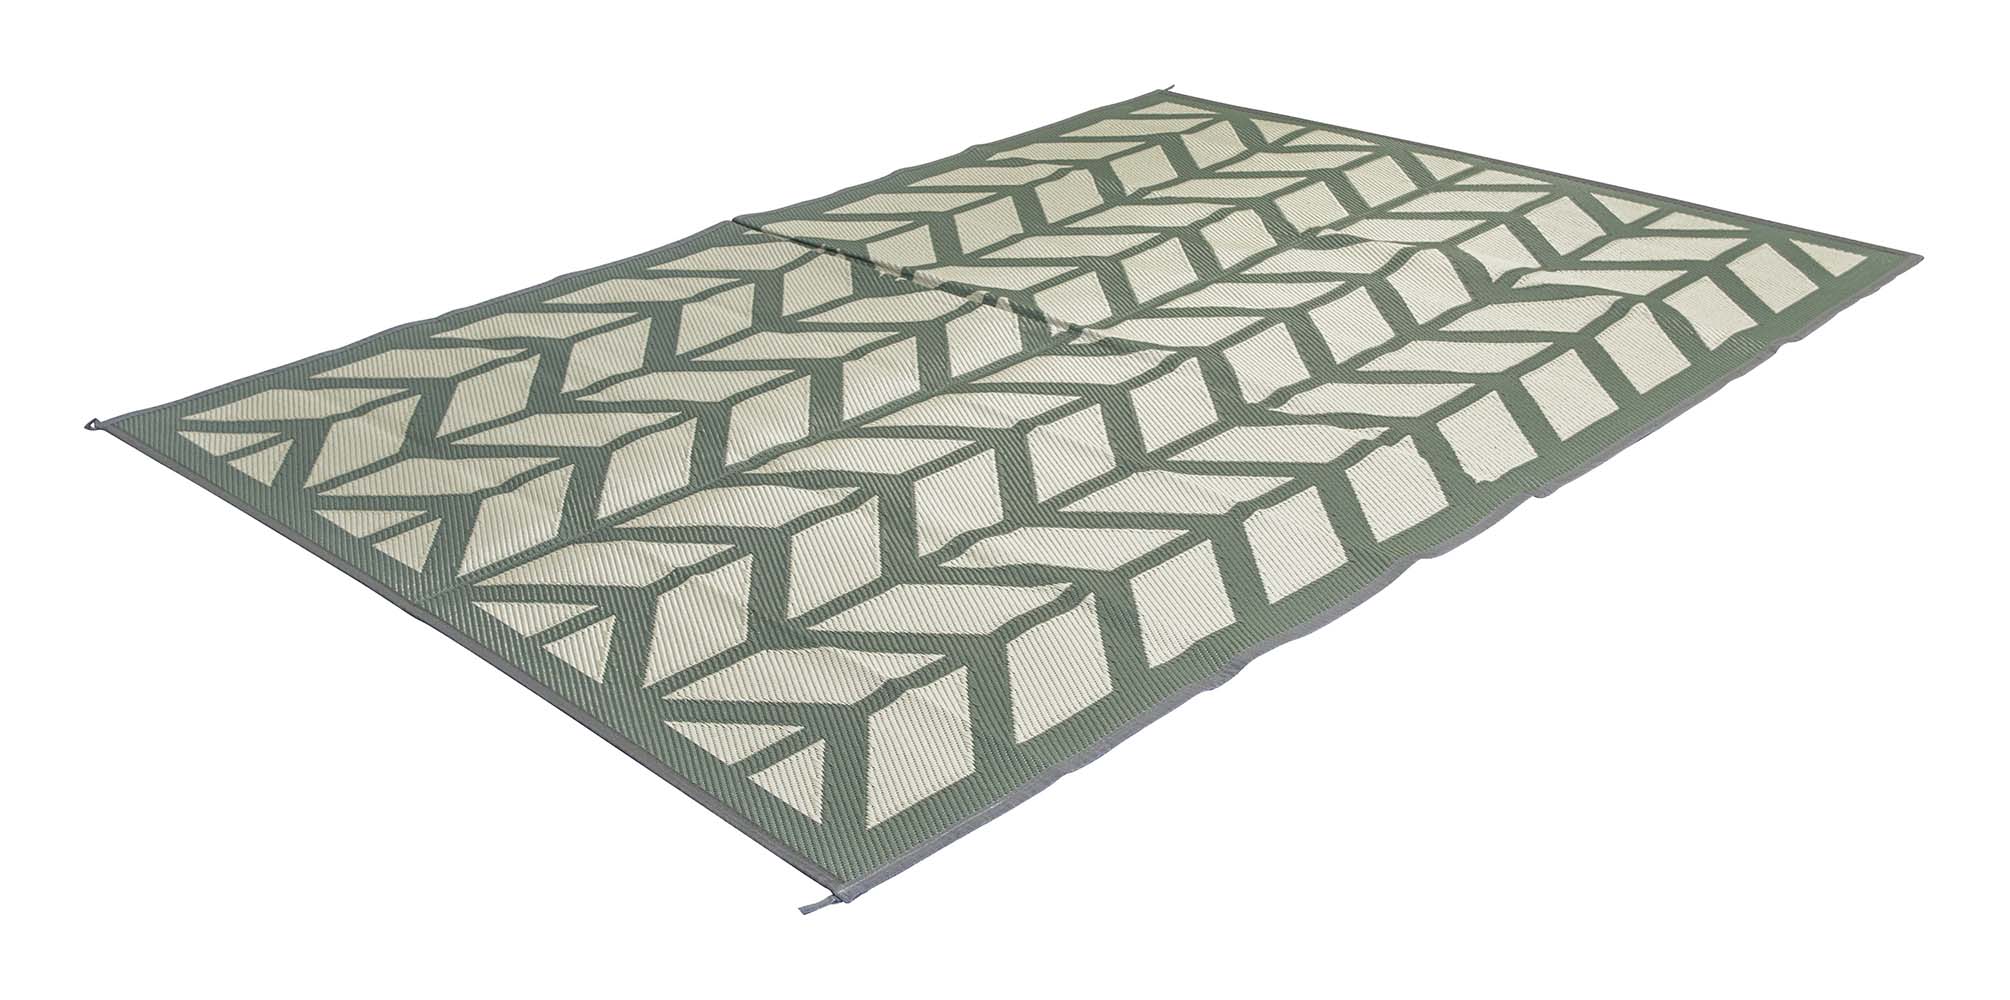 4271072 Bo-Camp - Industrial collection - Chill Mat - Flaxton - Groen - M